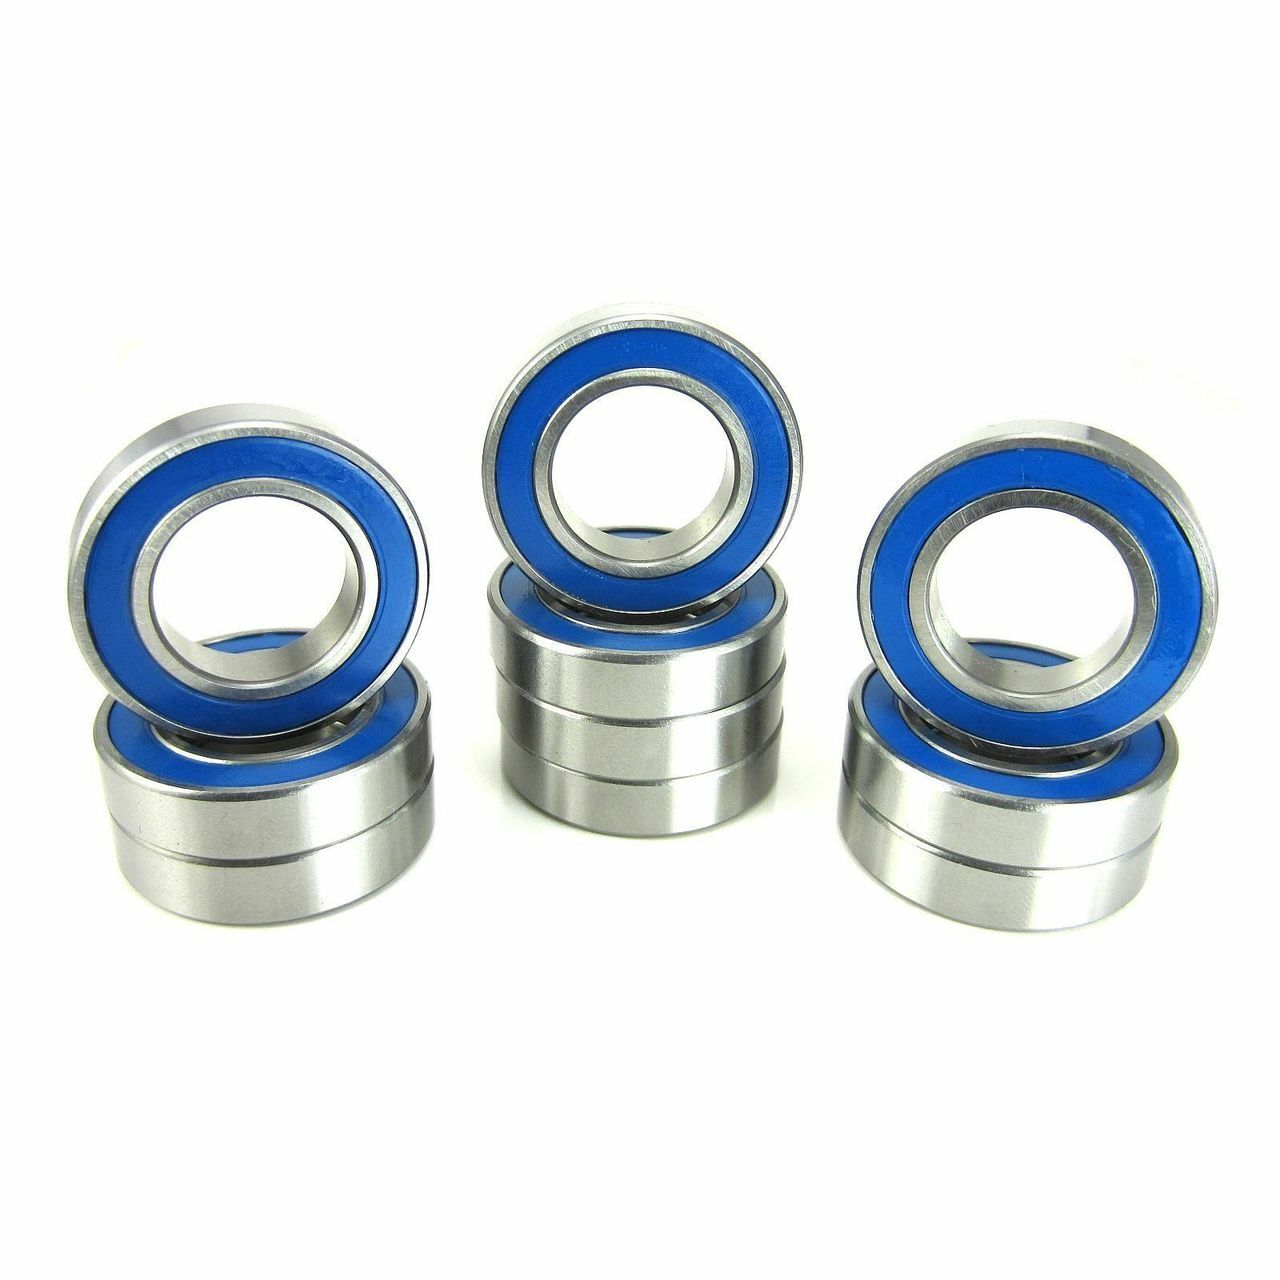 6903-2RS 17x30x7mm Precision High Speed RC Ball Bearing, Chrome Steel (GCr15) with Blue Rubber Seals ABEC-1 ABEC-3 ABEC-5